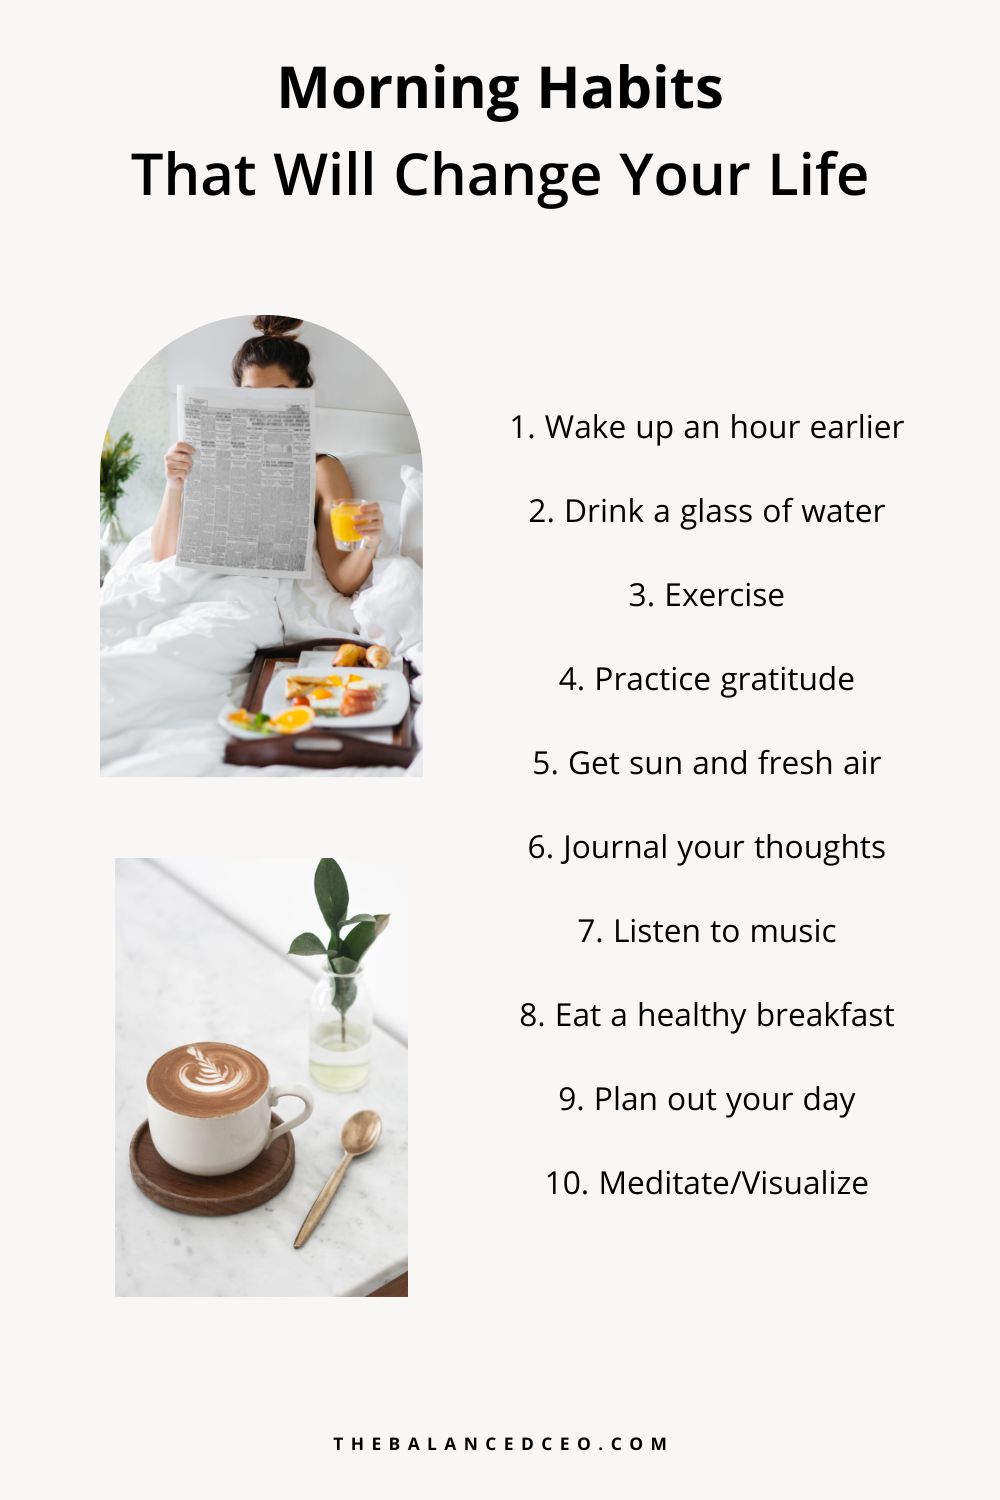 10 Morning Habits That Will Change Your Life - The Balanced CEO